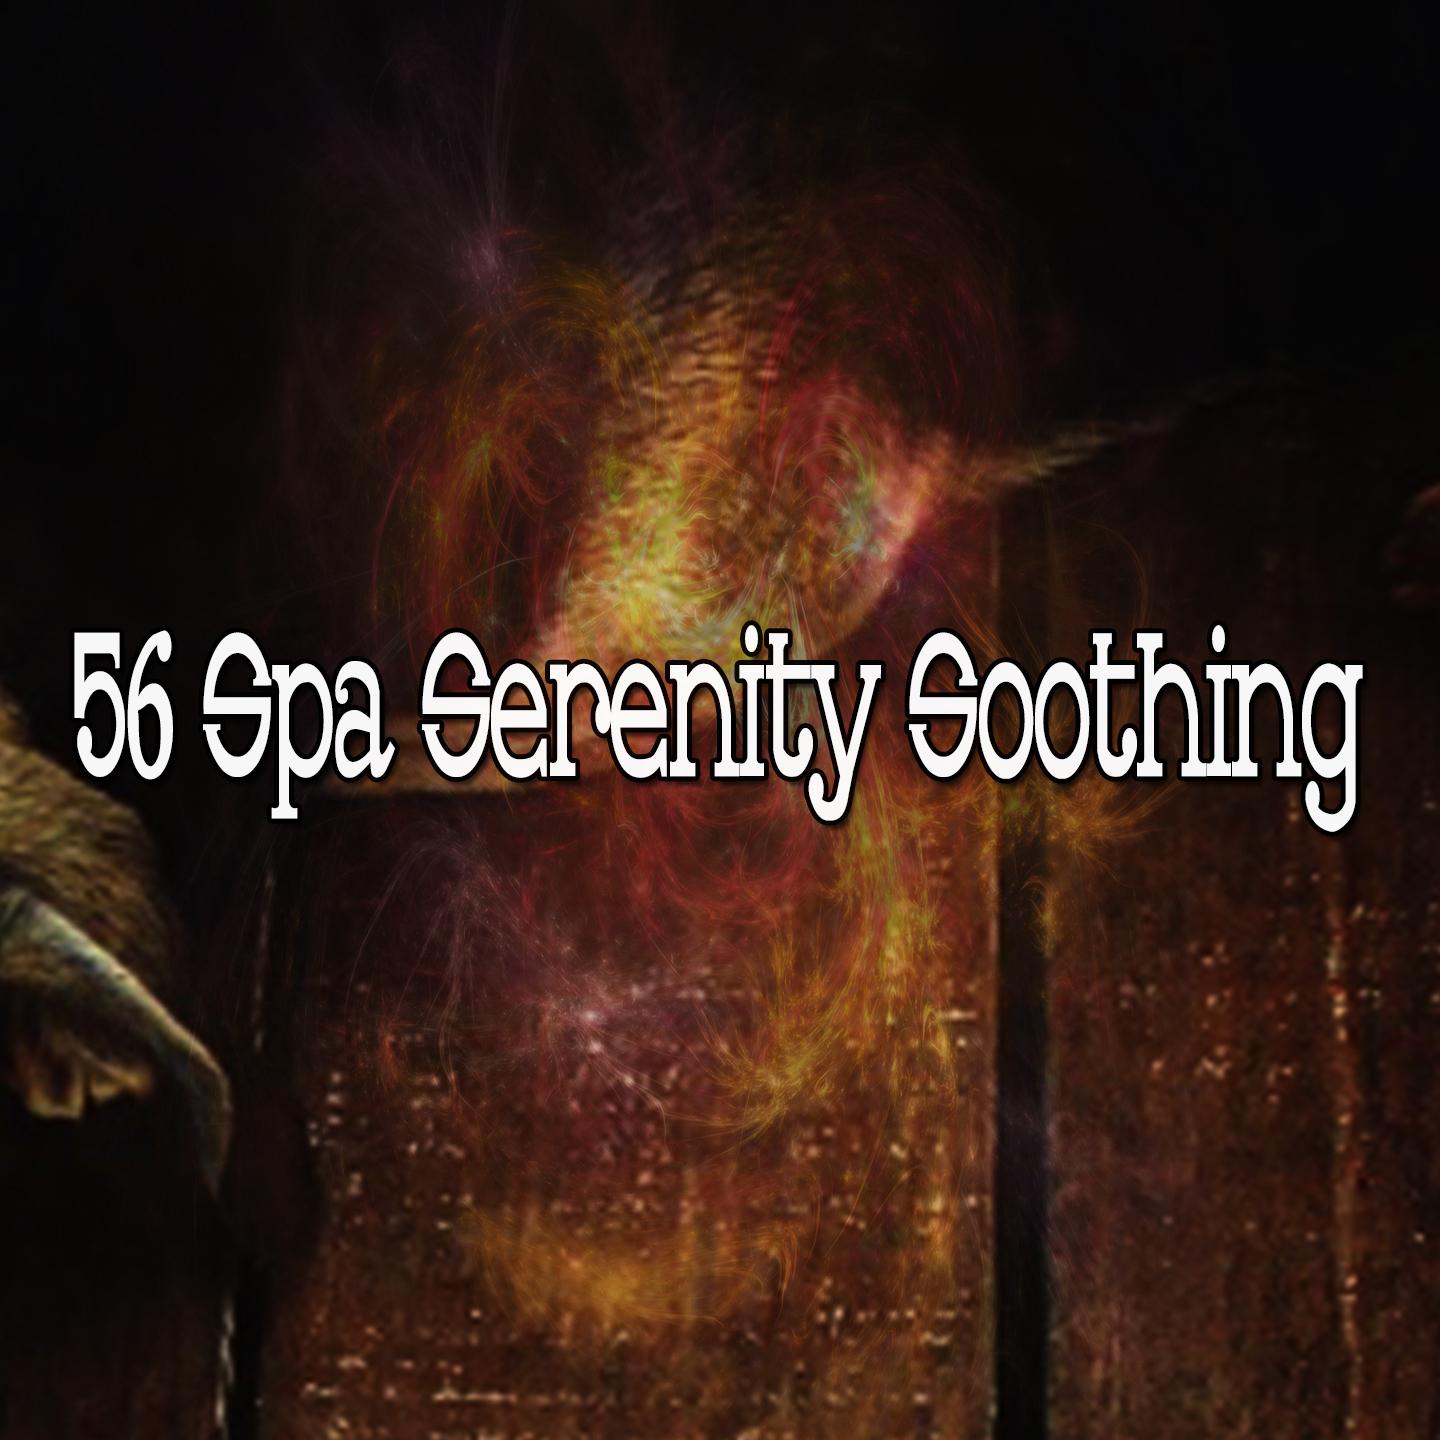 56 Spa Serenity Soothing